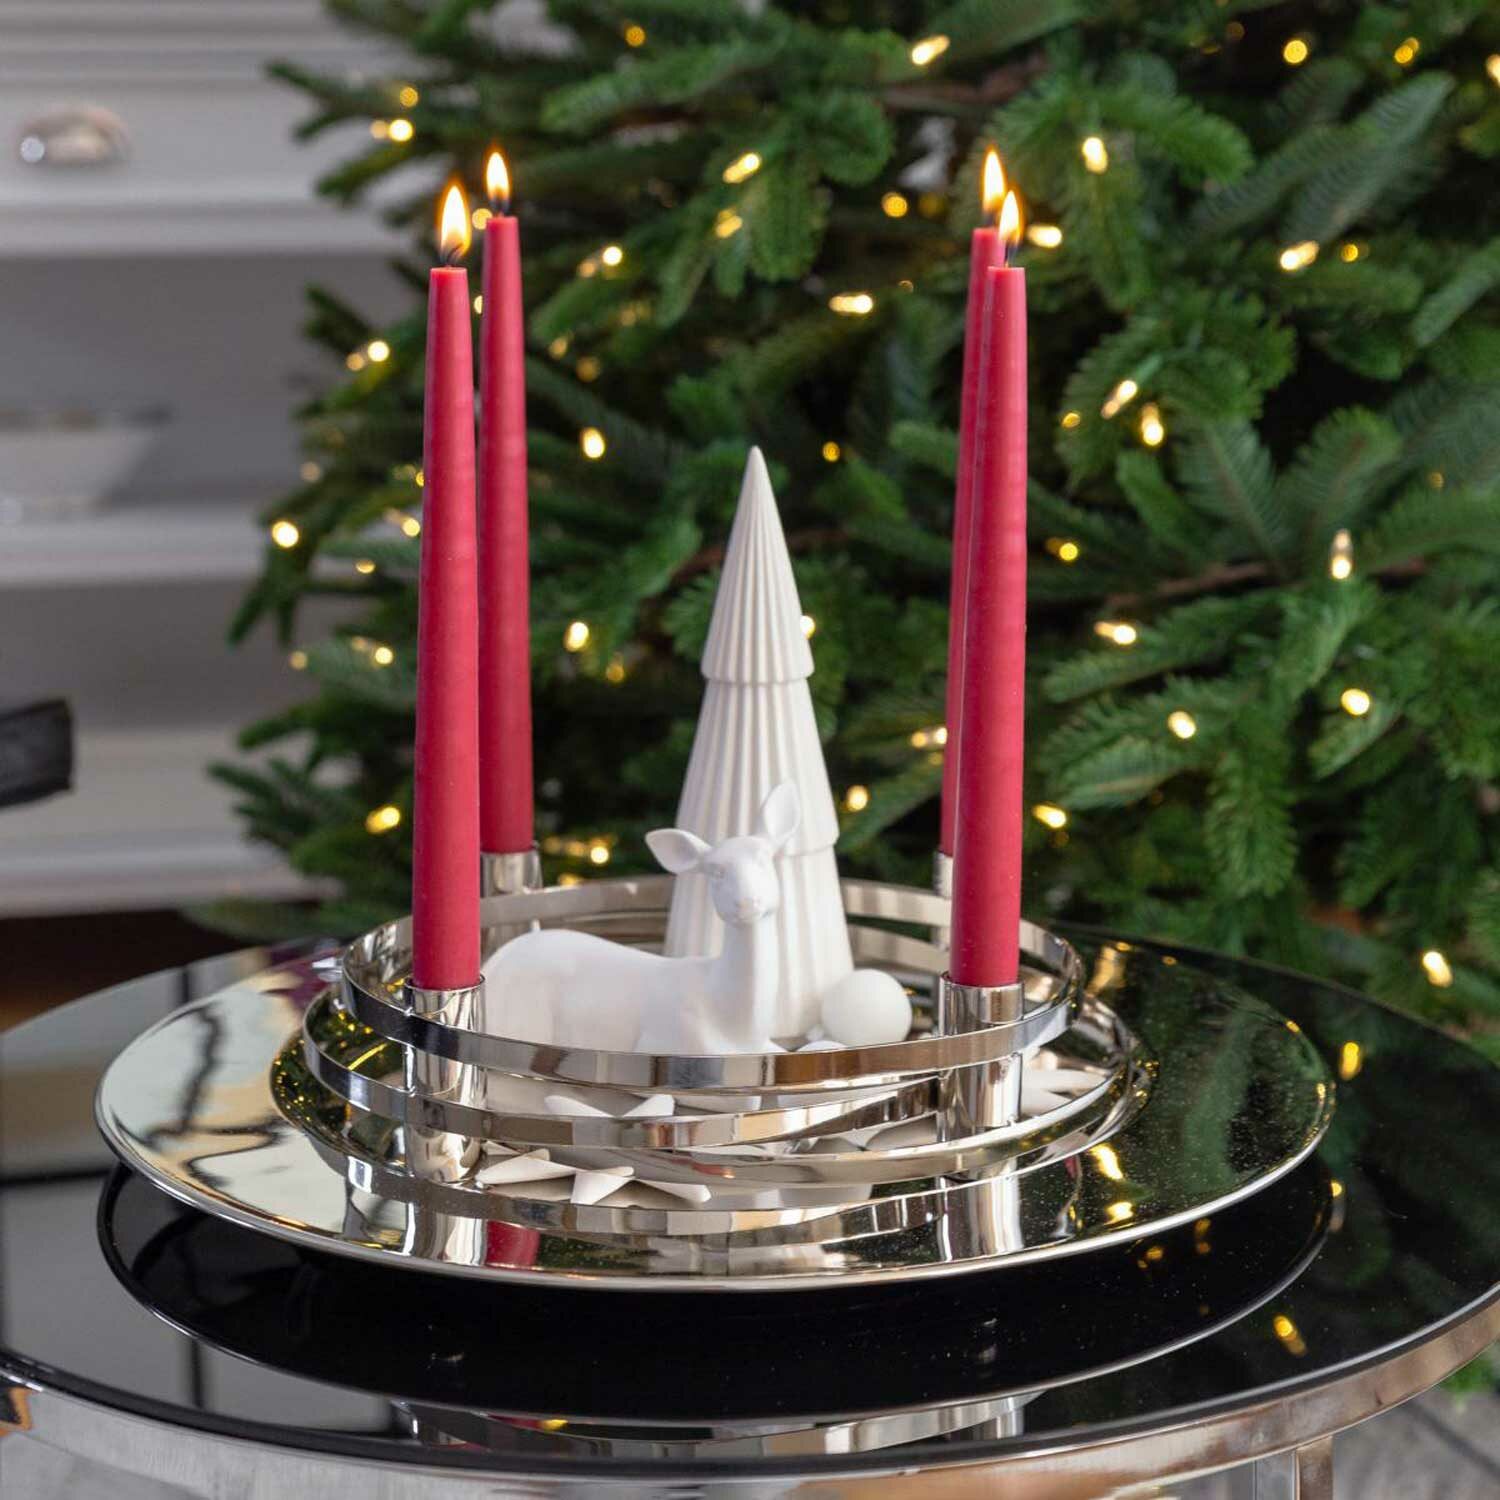 LA AVIA candlestick wreath with plate D 40 cm for stick candles